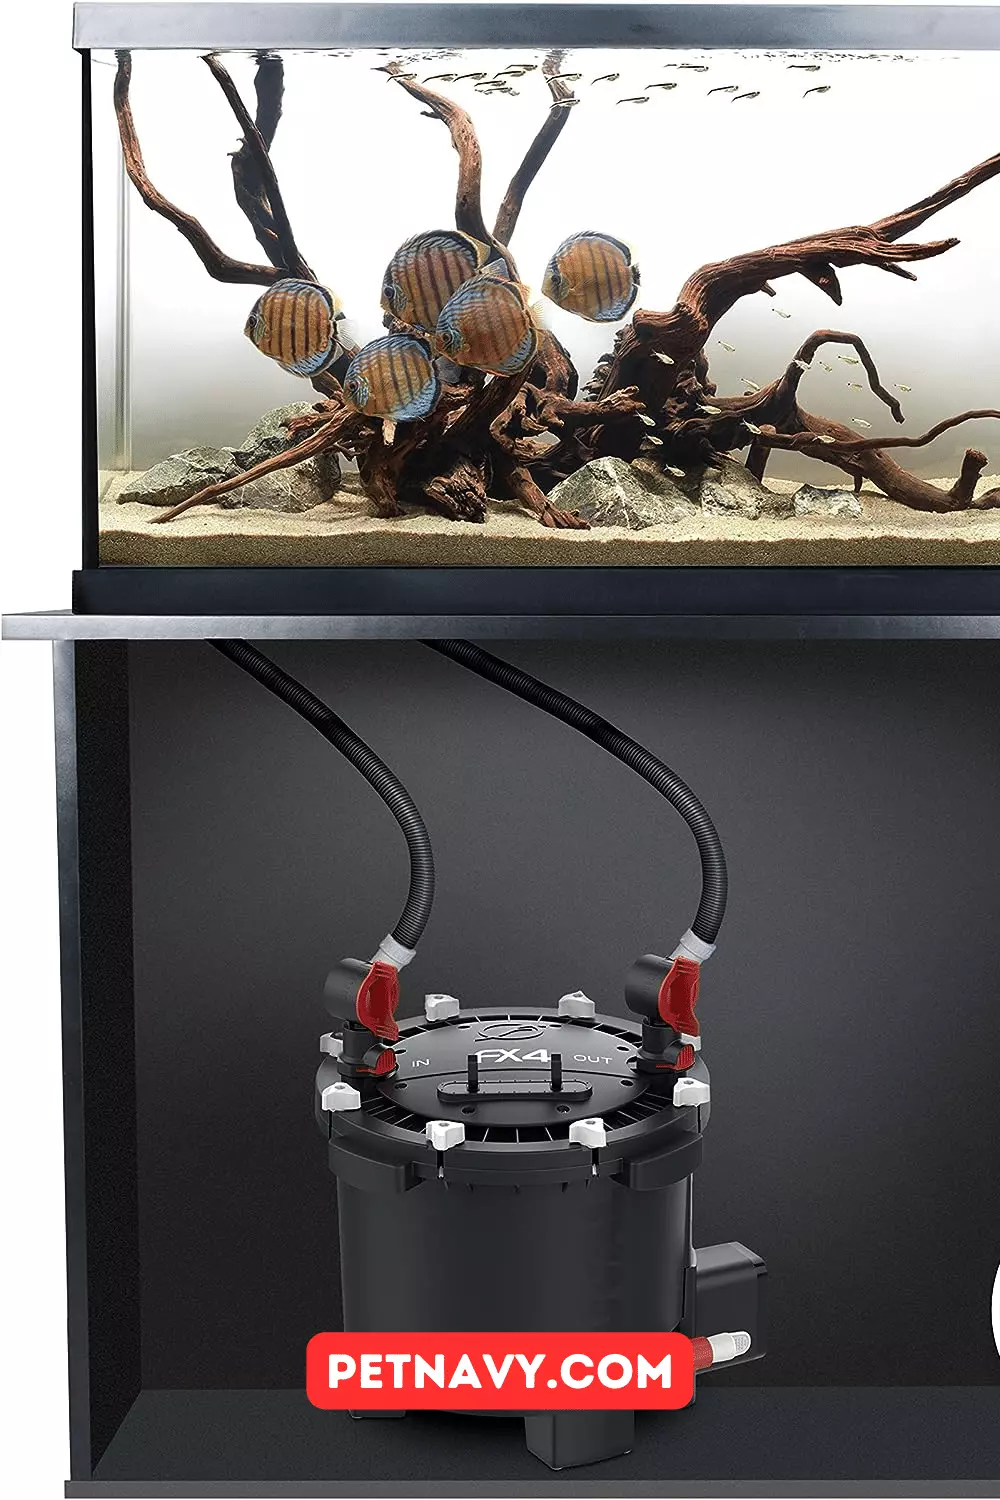 Aquarium Canister Filters: Which is the Best of 2023?